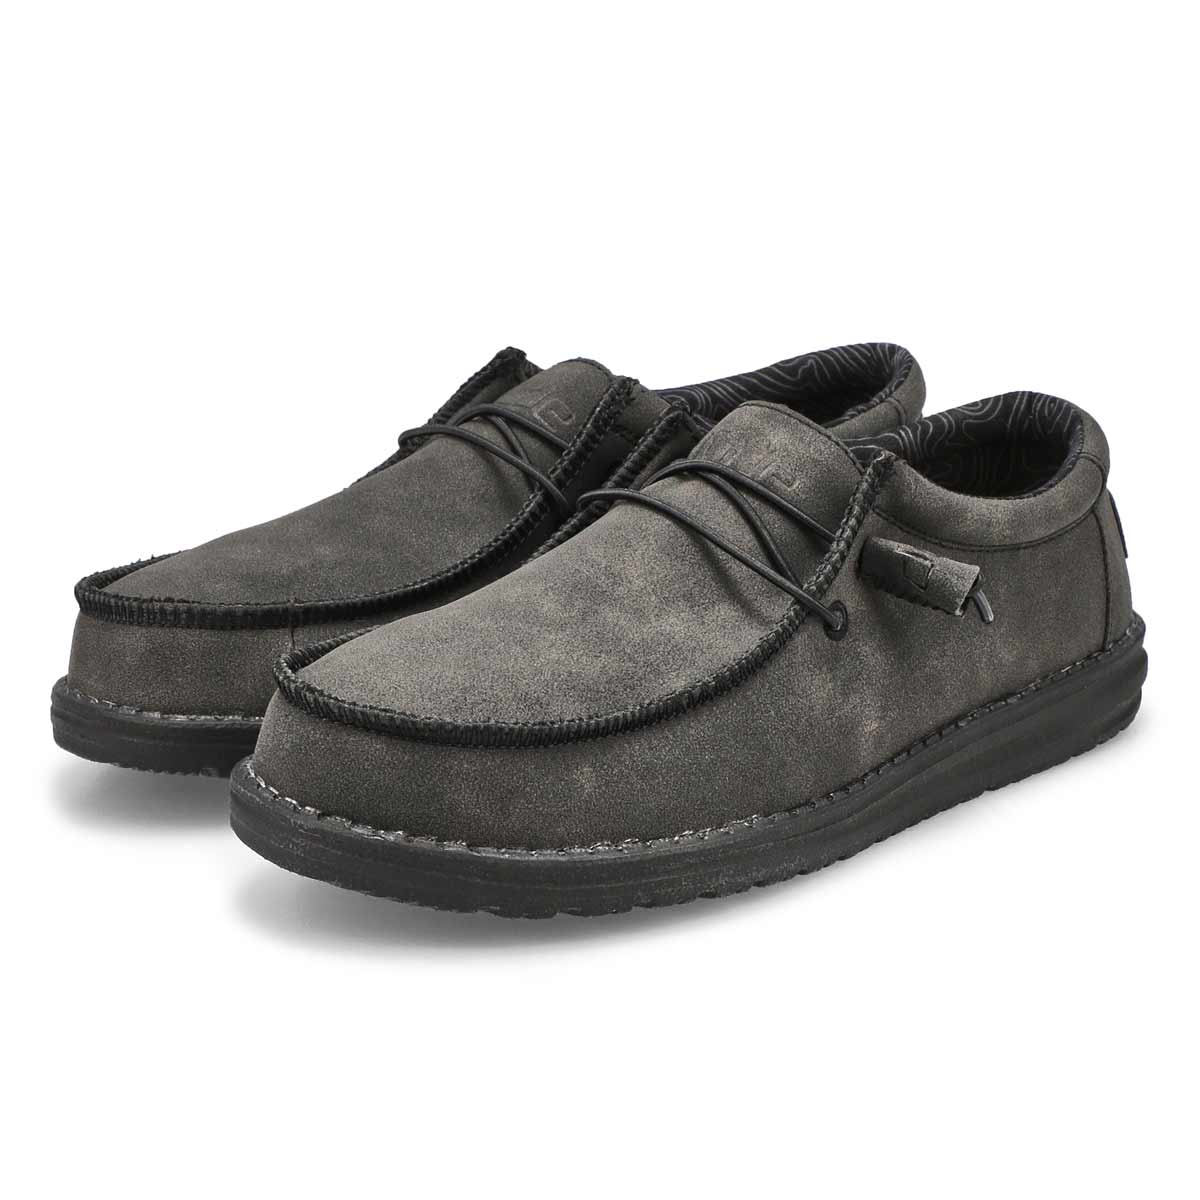 Men's Wally Recycled Leather Shoe - Carbon